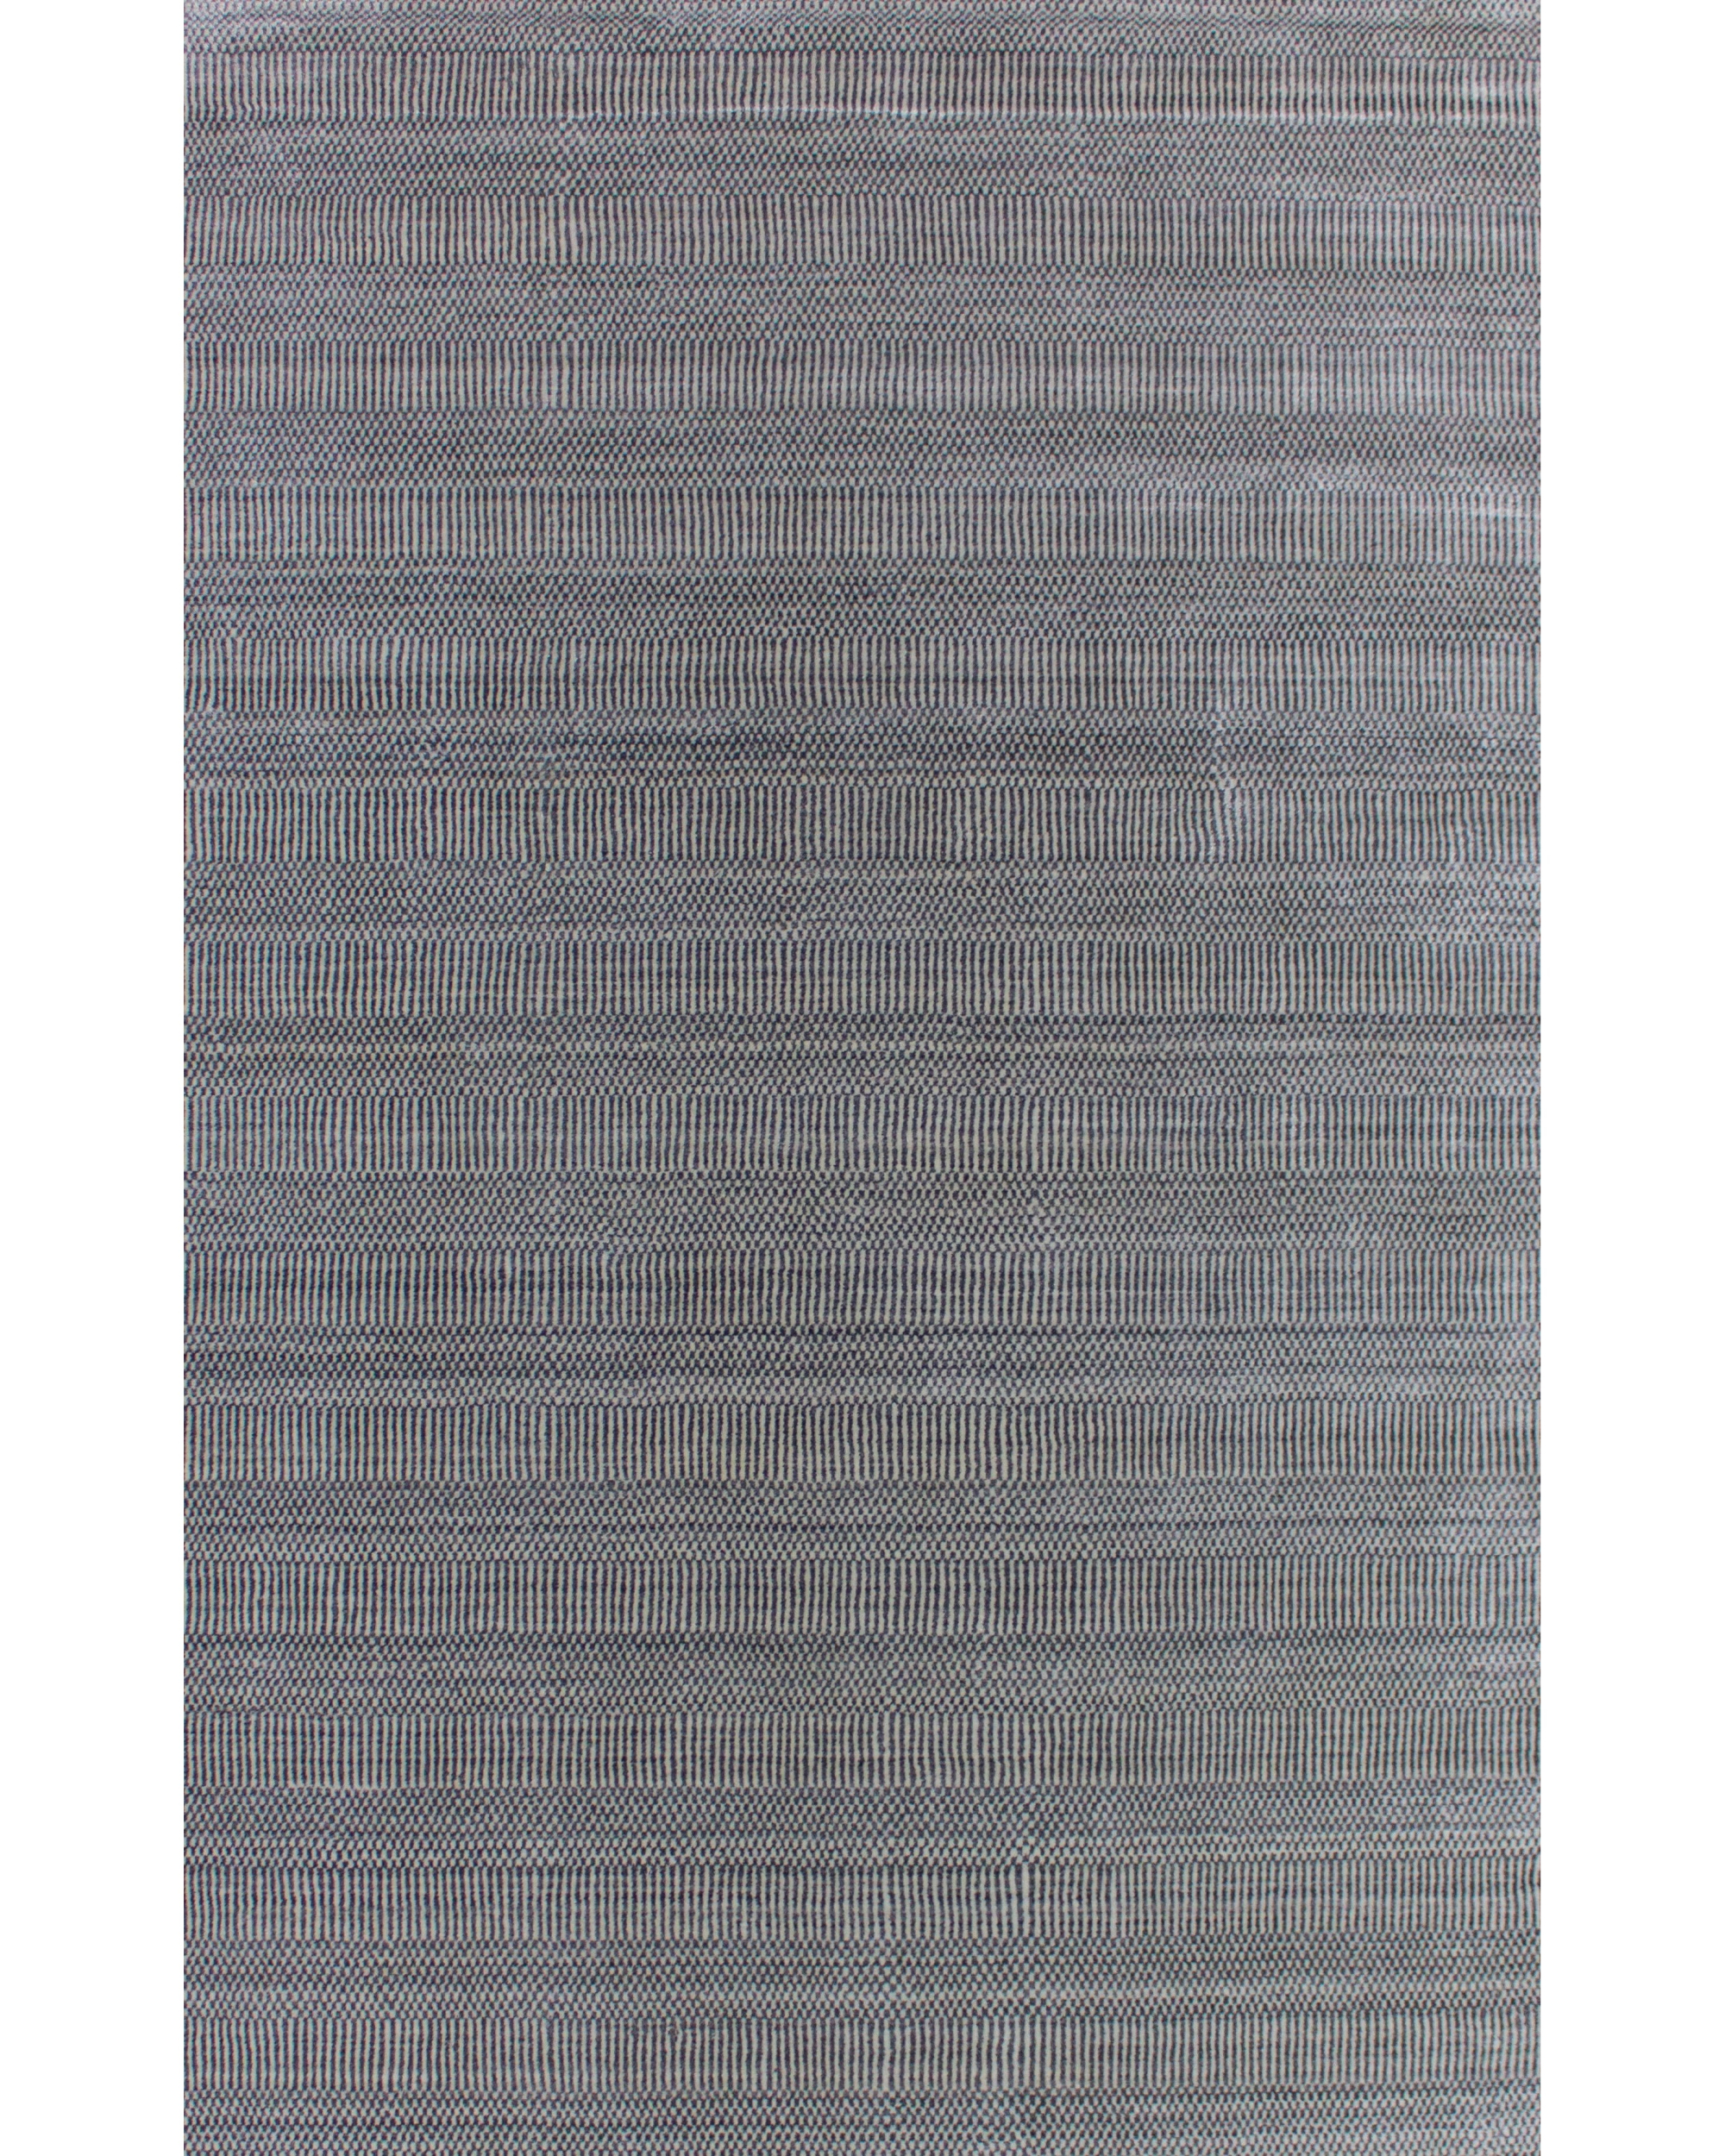 Grass Ivory/Light Grey Handmade Rug-Area rug for living room, dining area, and bedroom